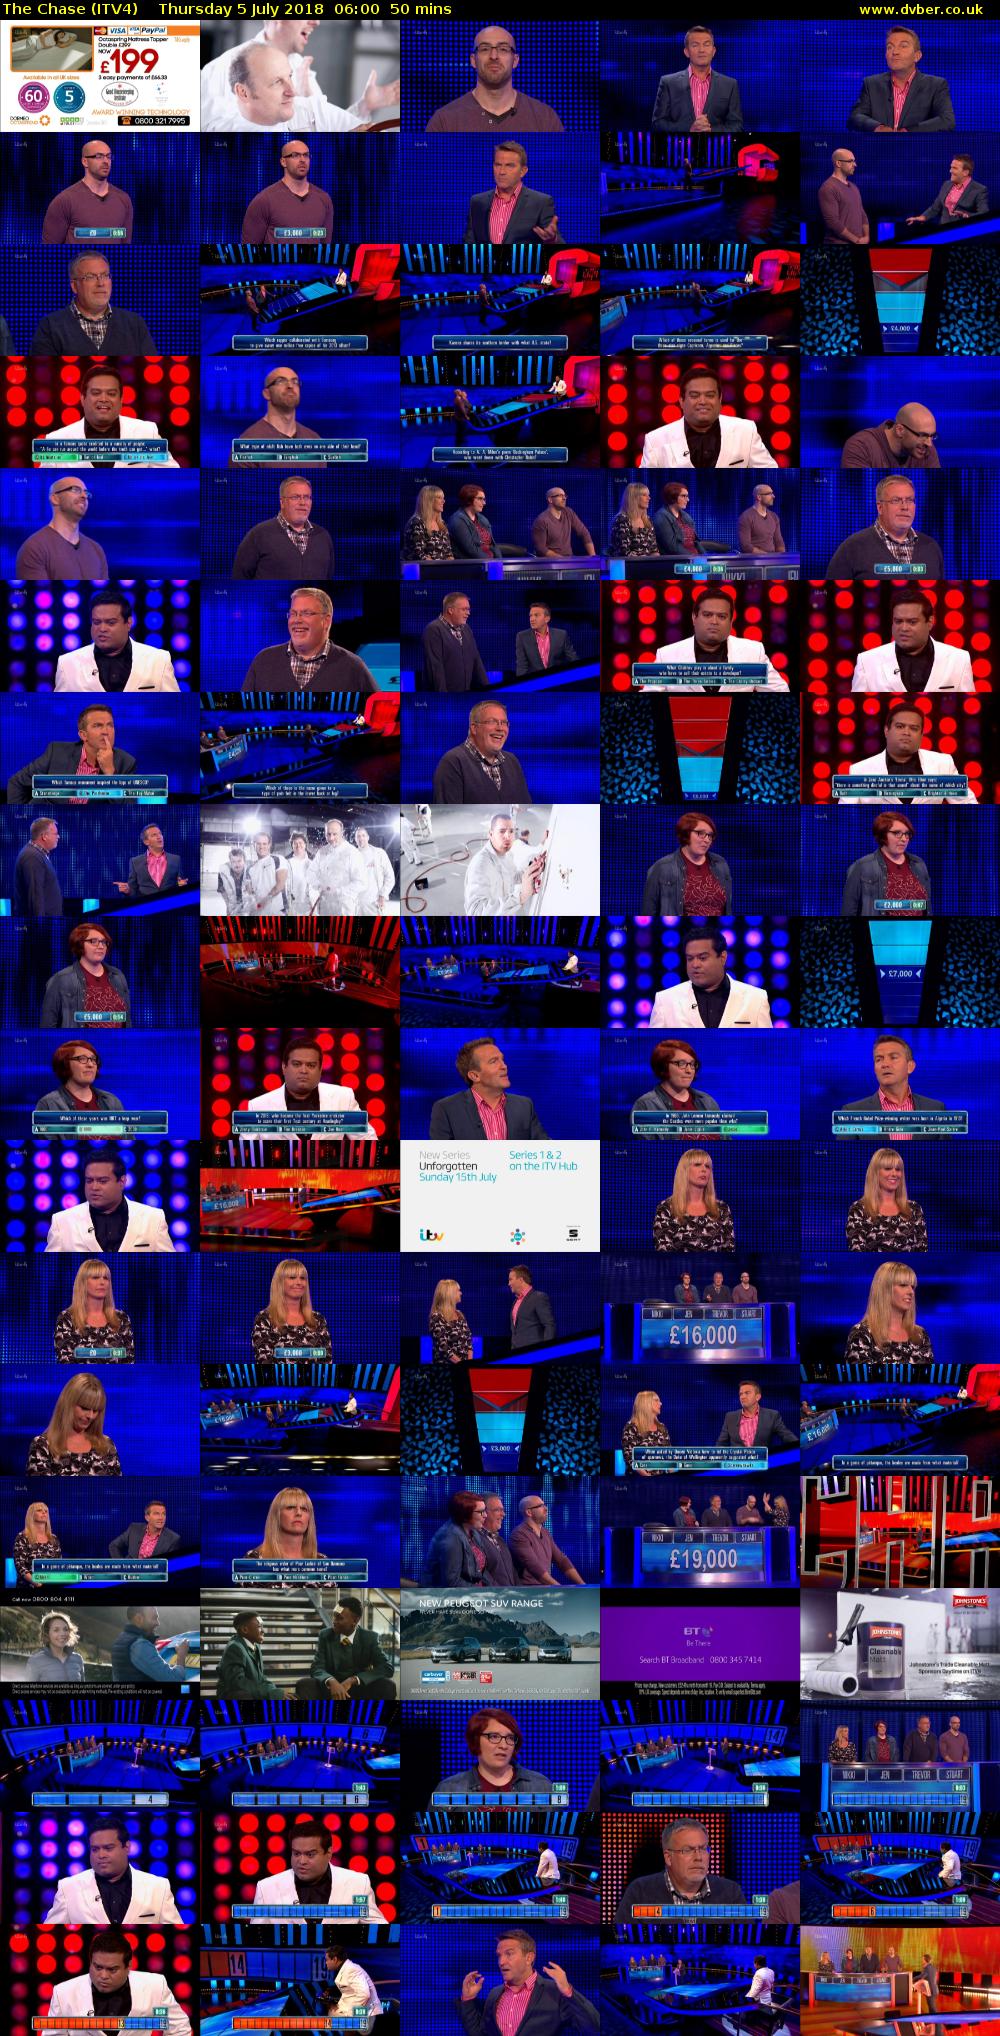 The Chase (ITV4) Thursday 5 July 2018 06:00 - 06:50